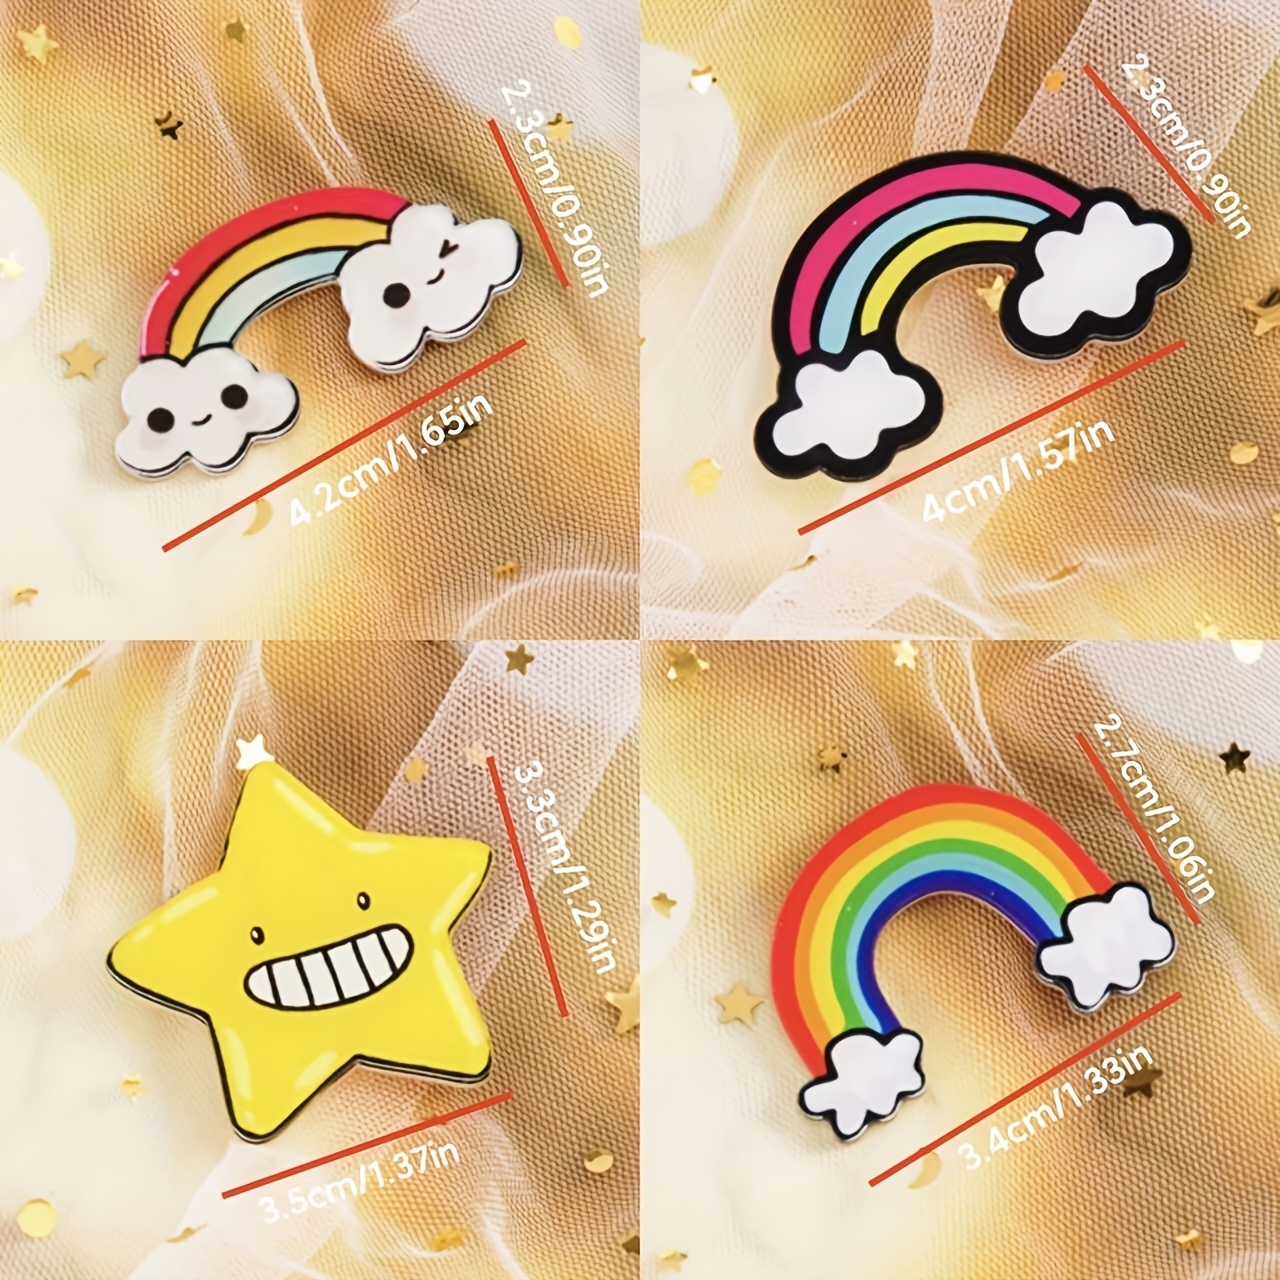 China Superior Factory Small Quantity manufacturer maker translucent paint  Custom lapel pin soft anime enamel pins metal designer pins Manufacturer  and Supplier | Coins and Pins Co., Ltd.